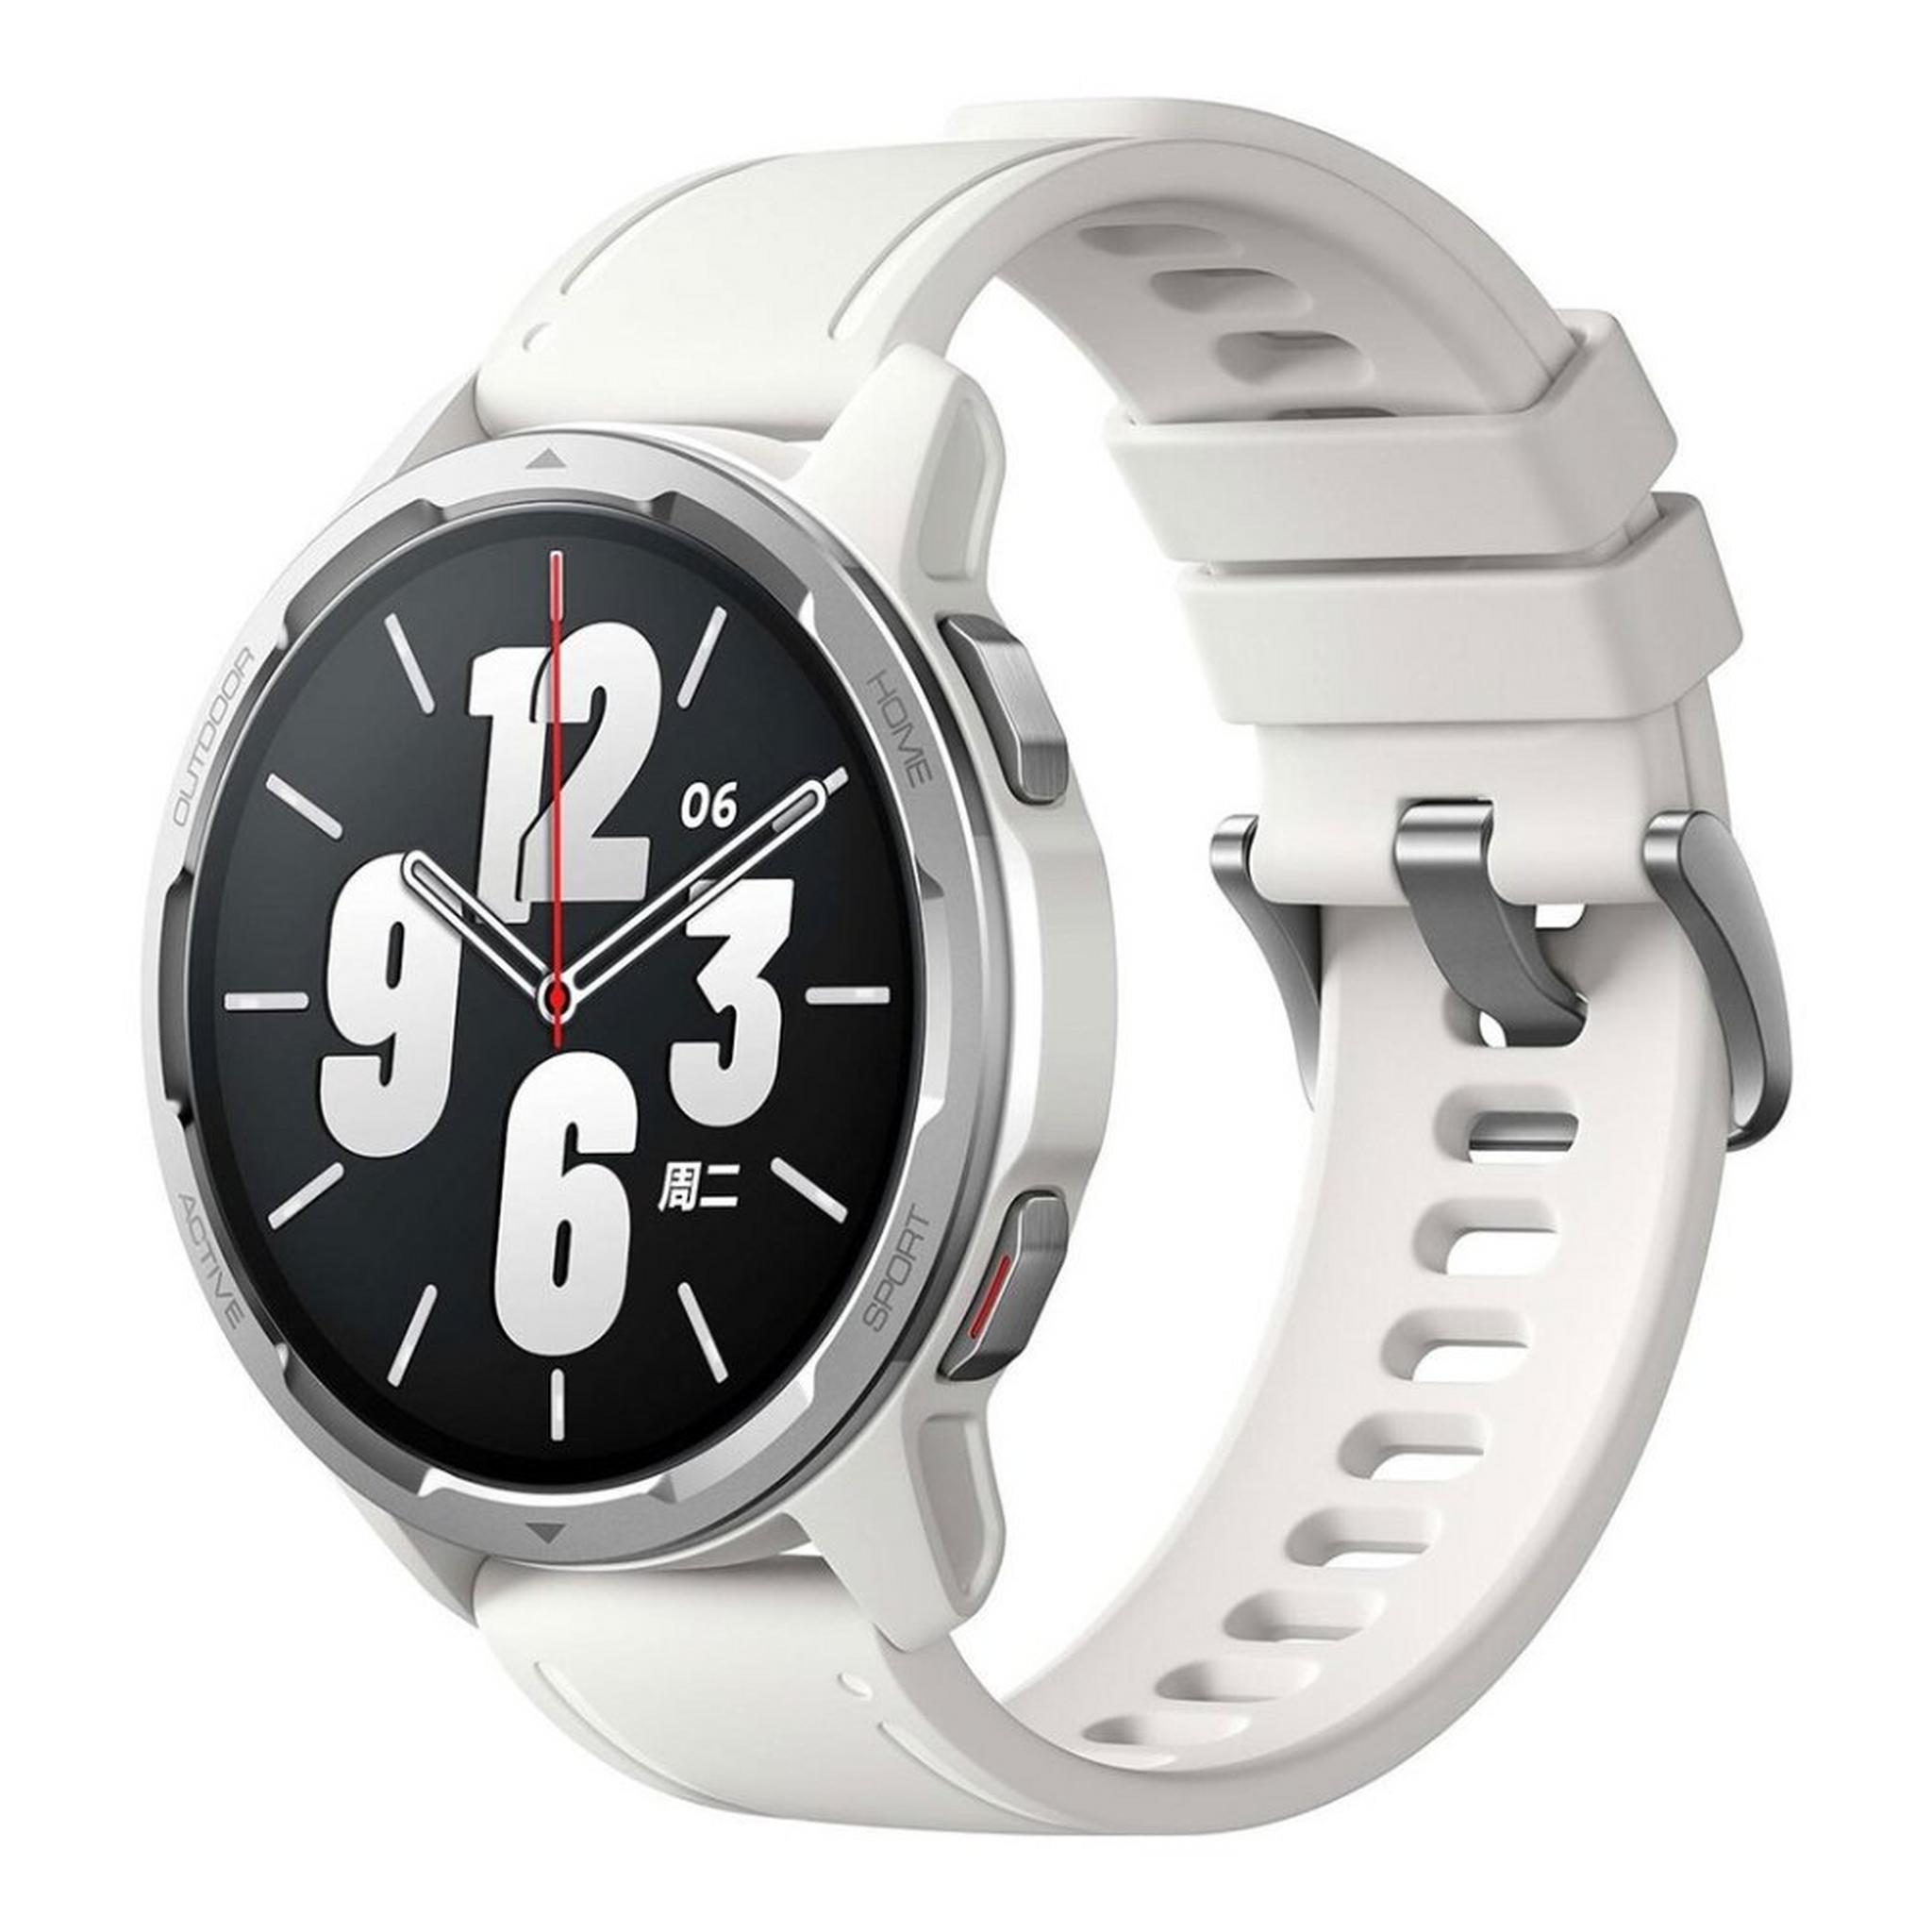 Xiaomi Watch S1 Active, 46mm, Aluminum body, Rubber Strap  - Moon White